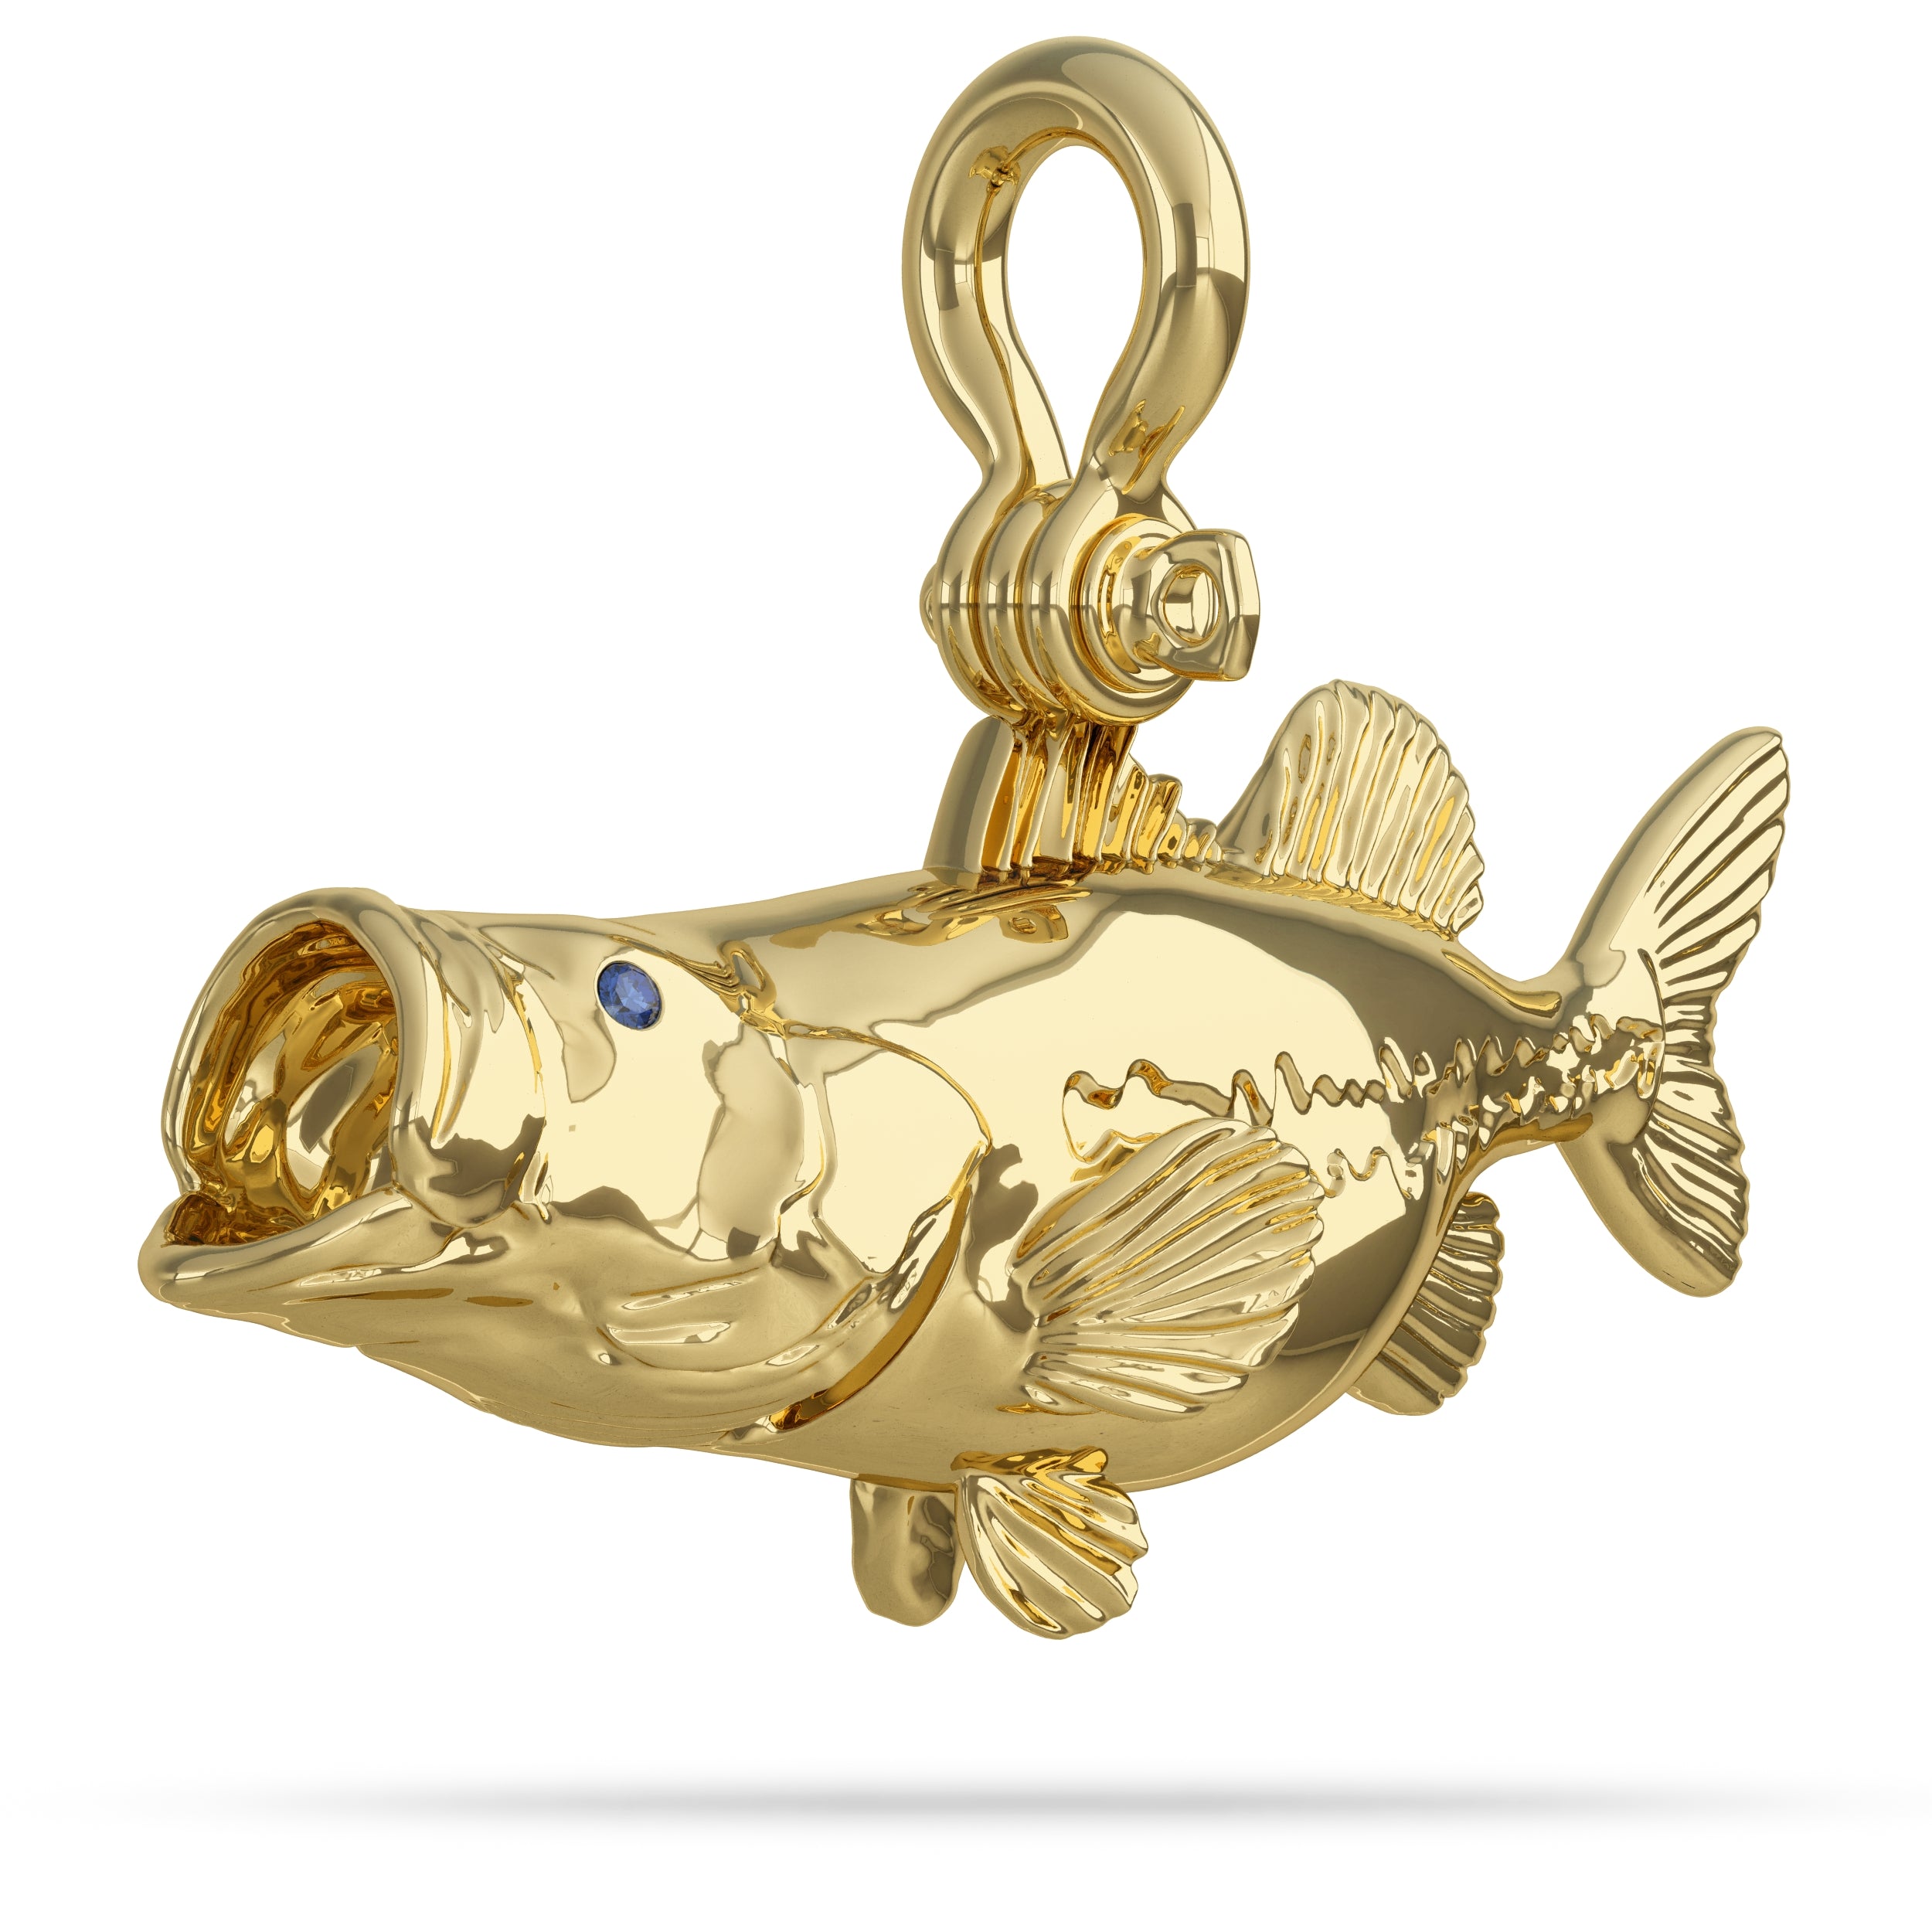 Solid 14k Gold Largemouth Bass Pendant With Mouth Wide Open Feeding High Polished Mirror Finish With Blue Sapphire Eye with A Mariner Shackle Bail Custom Designed By Nautical Treasure Jewelry In The Florida Keys 